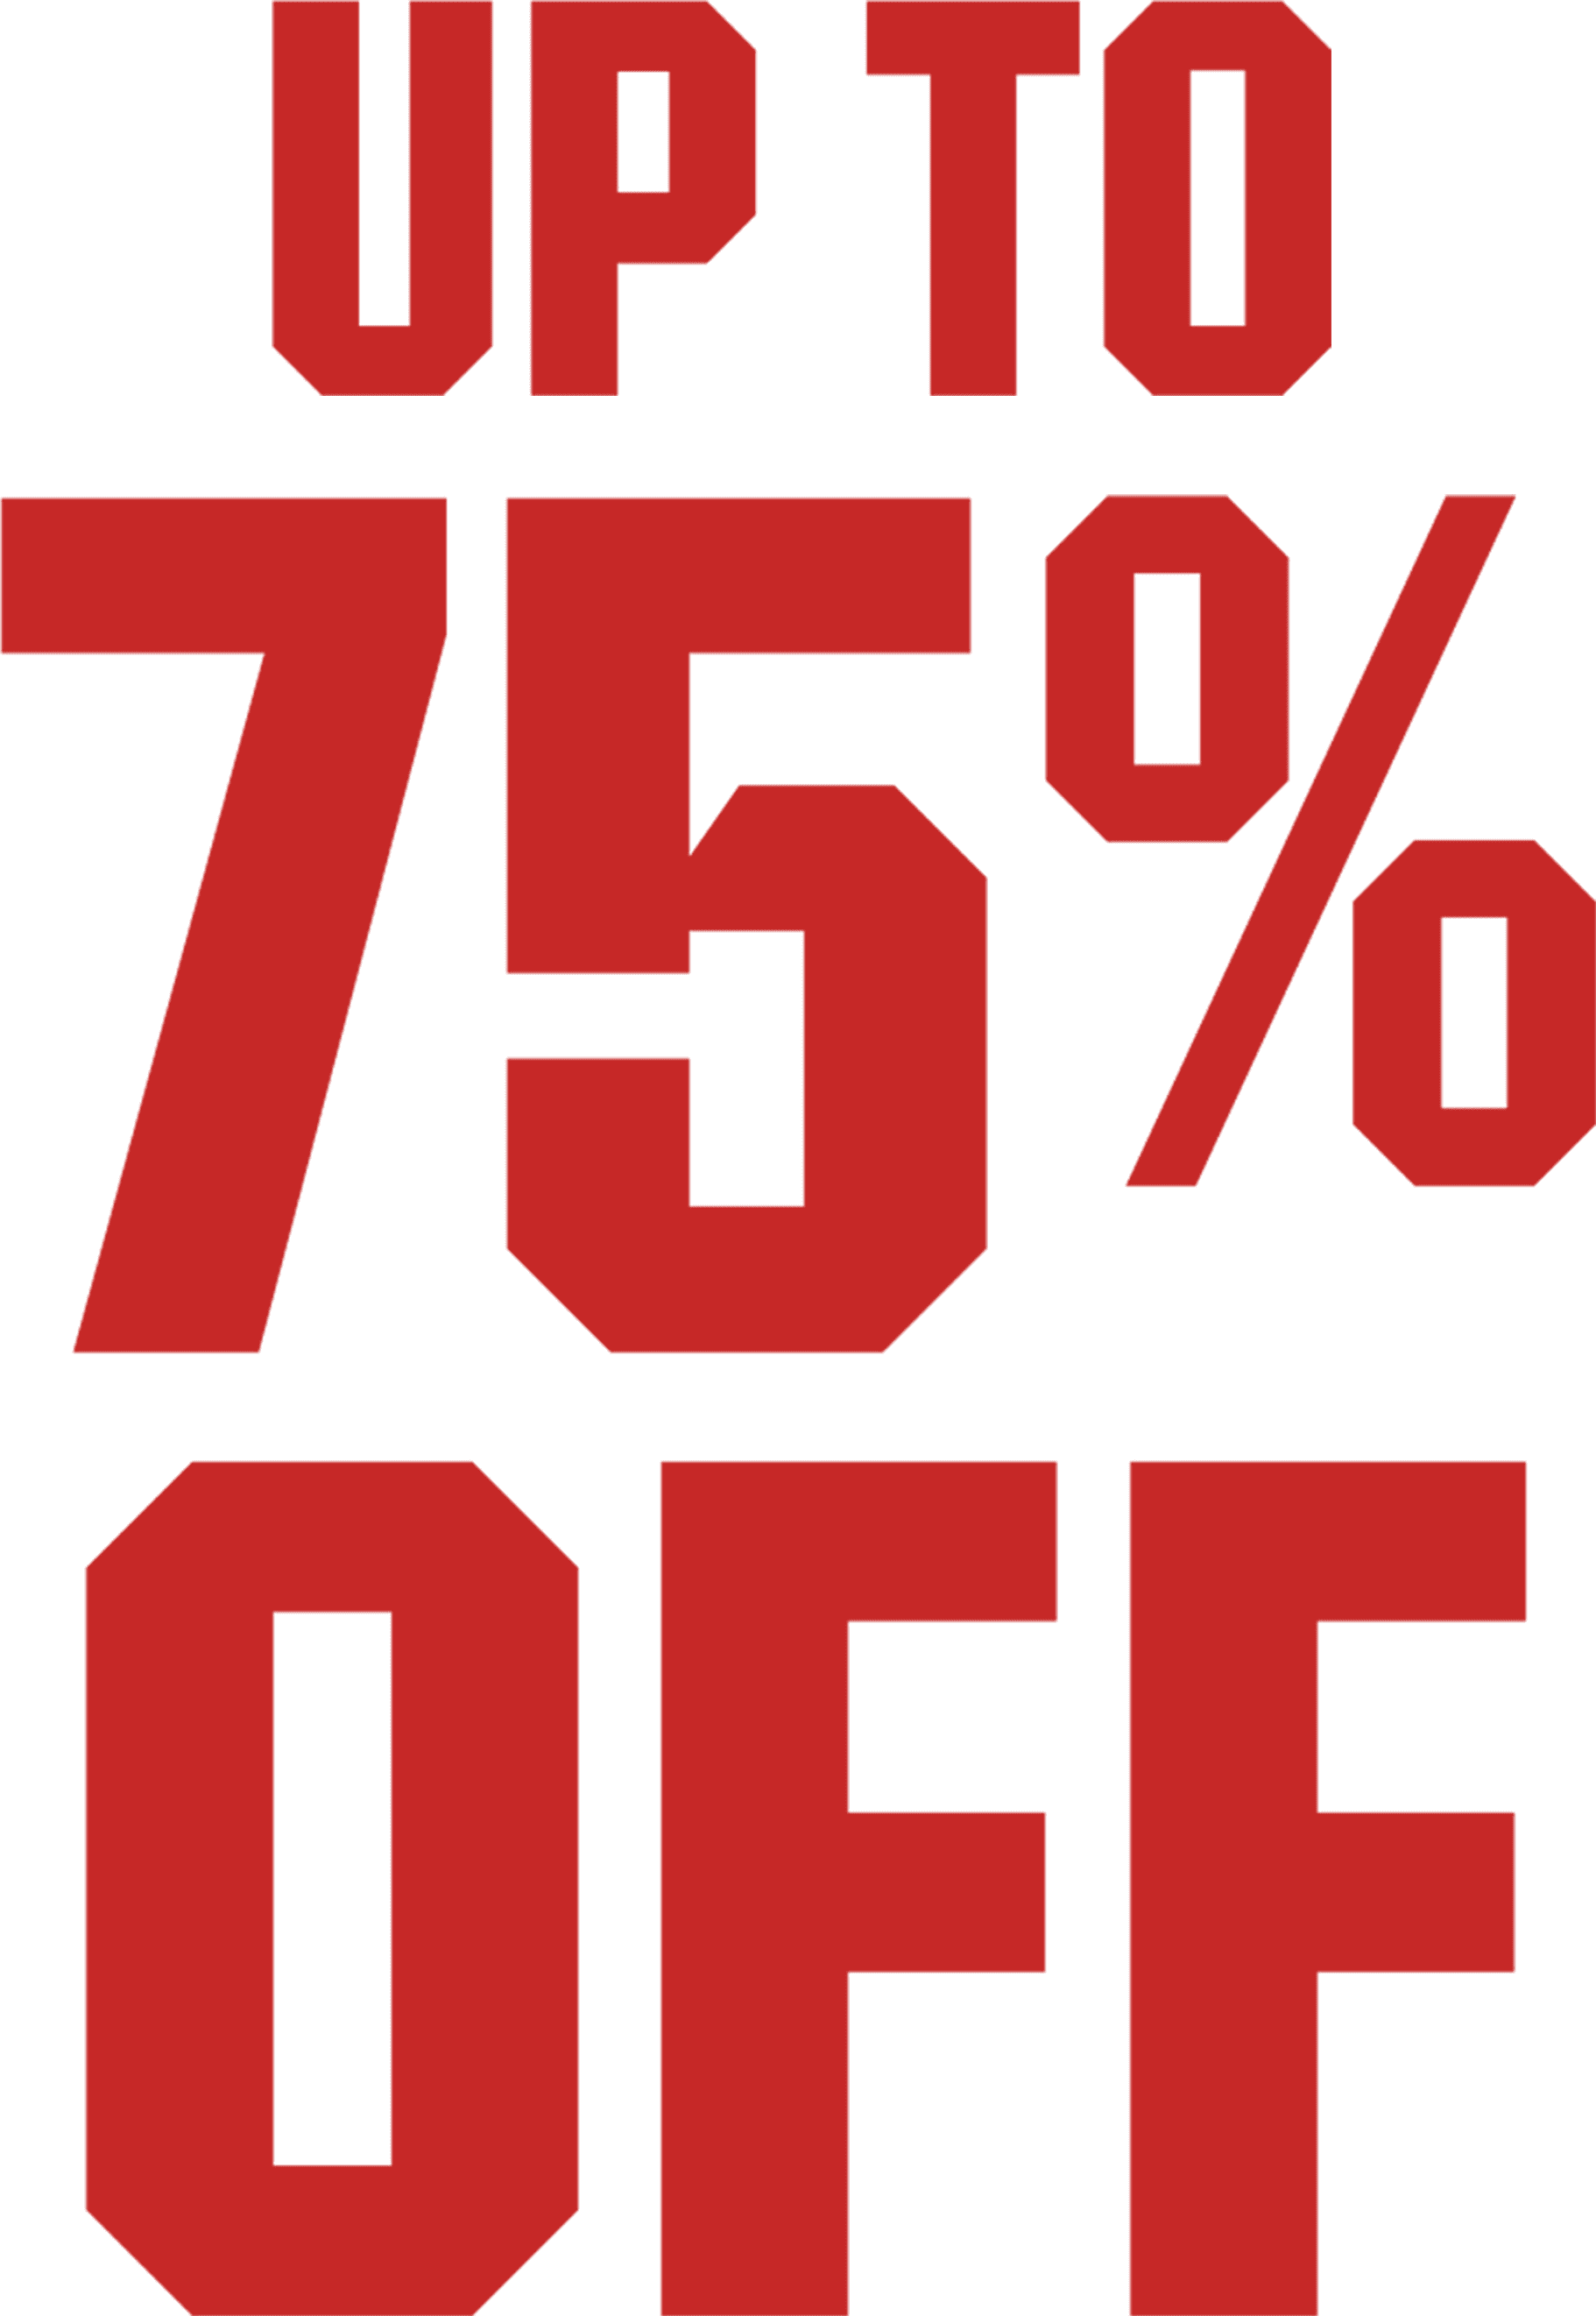 Up To 75% Off Text PNG